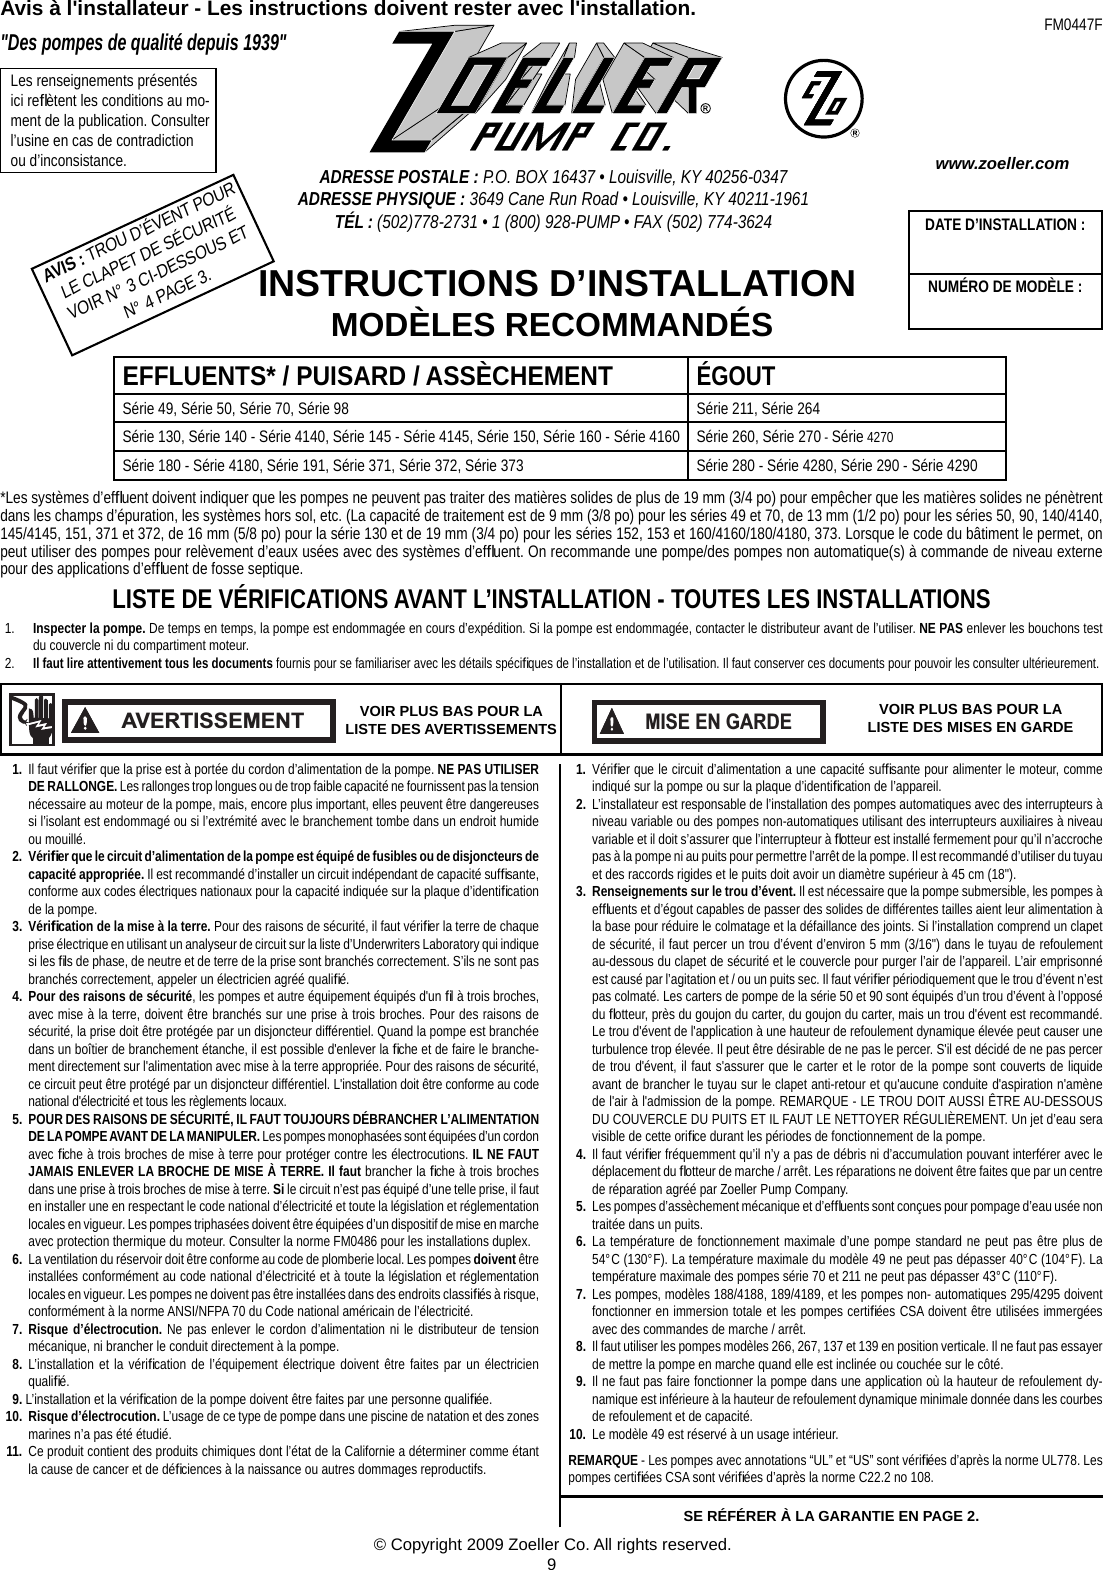 Page 9 of 12 - 3955 2 Zoeller 267-0057 Product Instructions Fm0447 User Manual